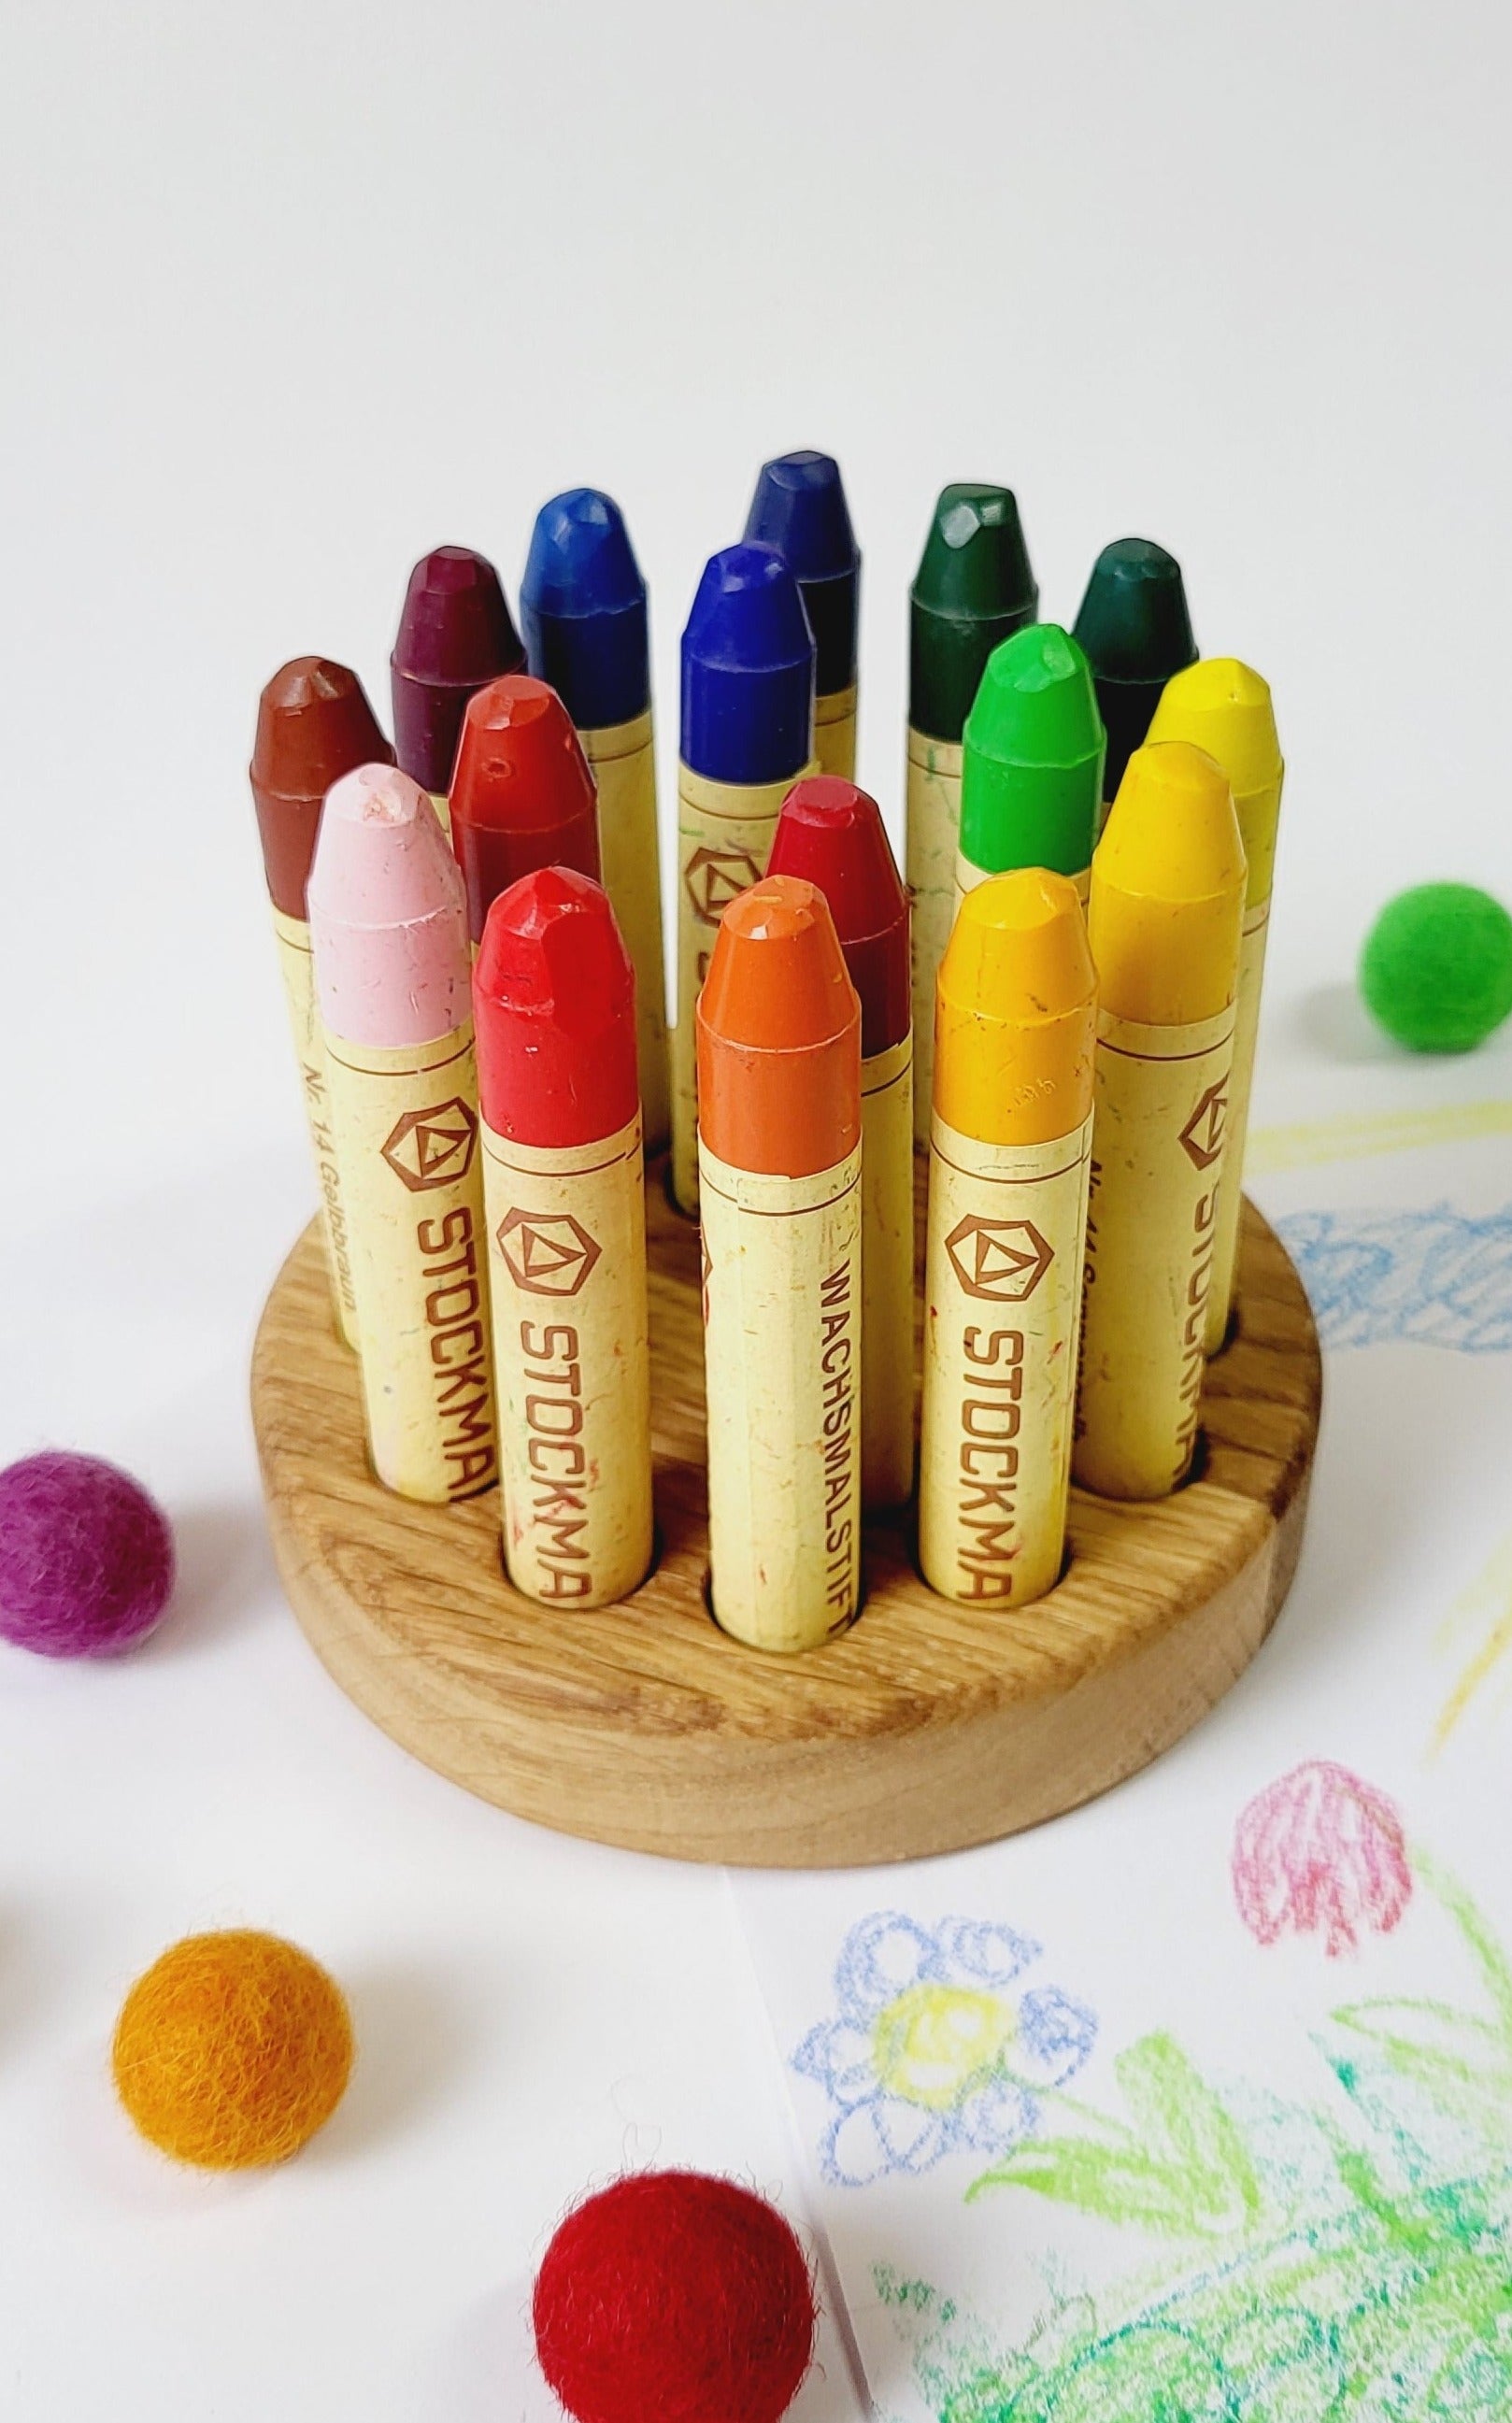 Stockmar crayon holder for 16 sticks, desk organization waldorf crayon holder without crayons, personalized gift for kids